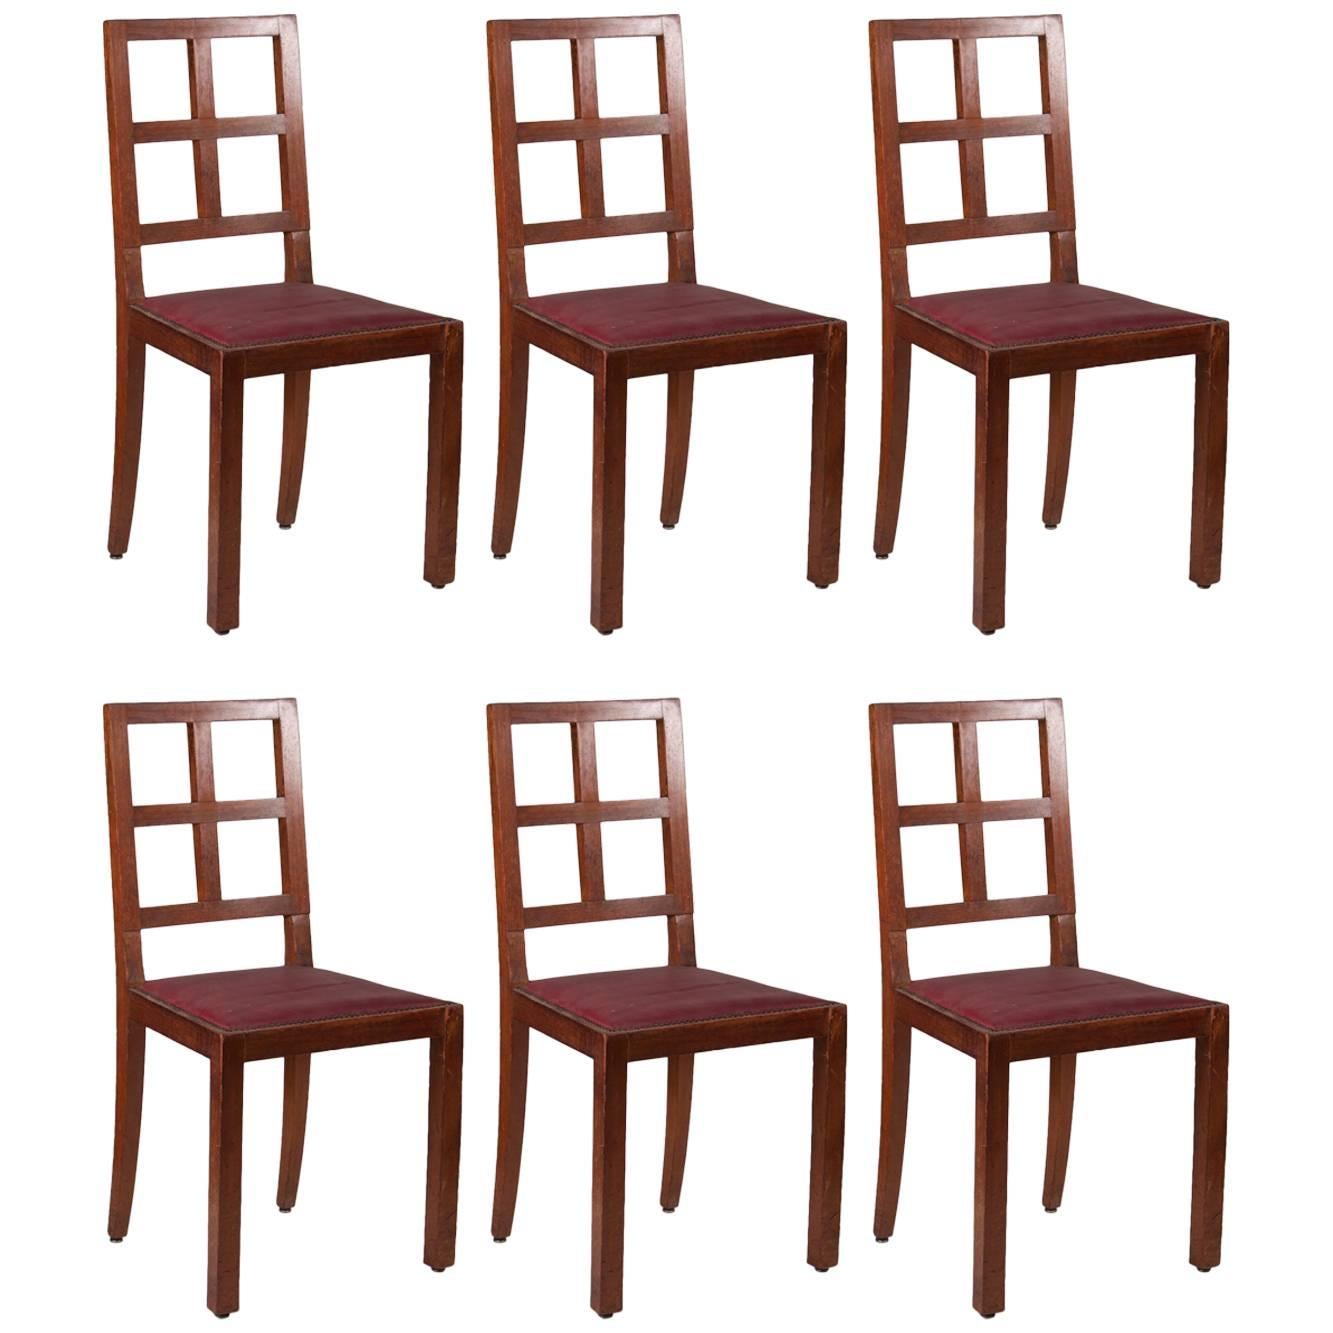 Francis Jourdain Set of Six Dining Chairs in Rosewood and Mahogany